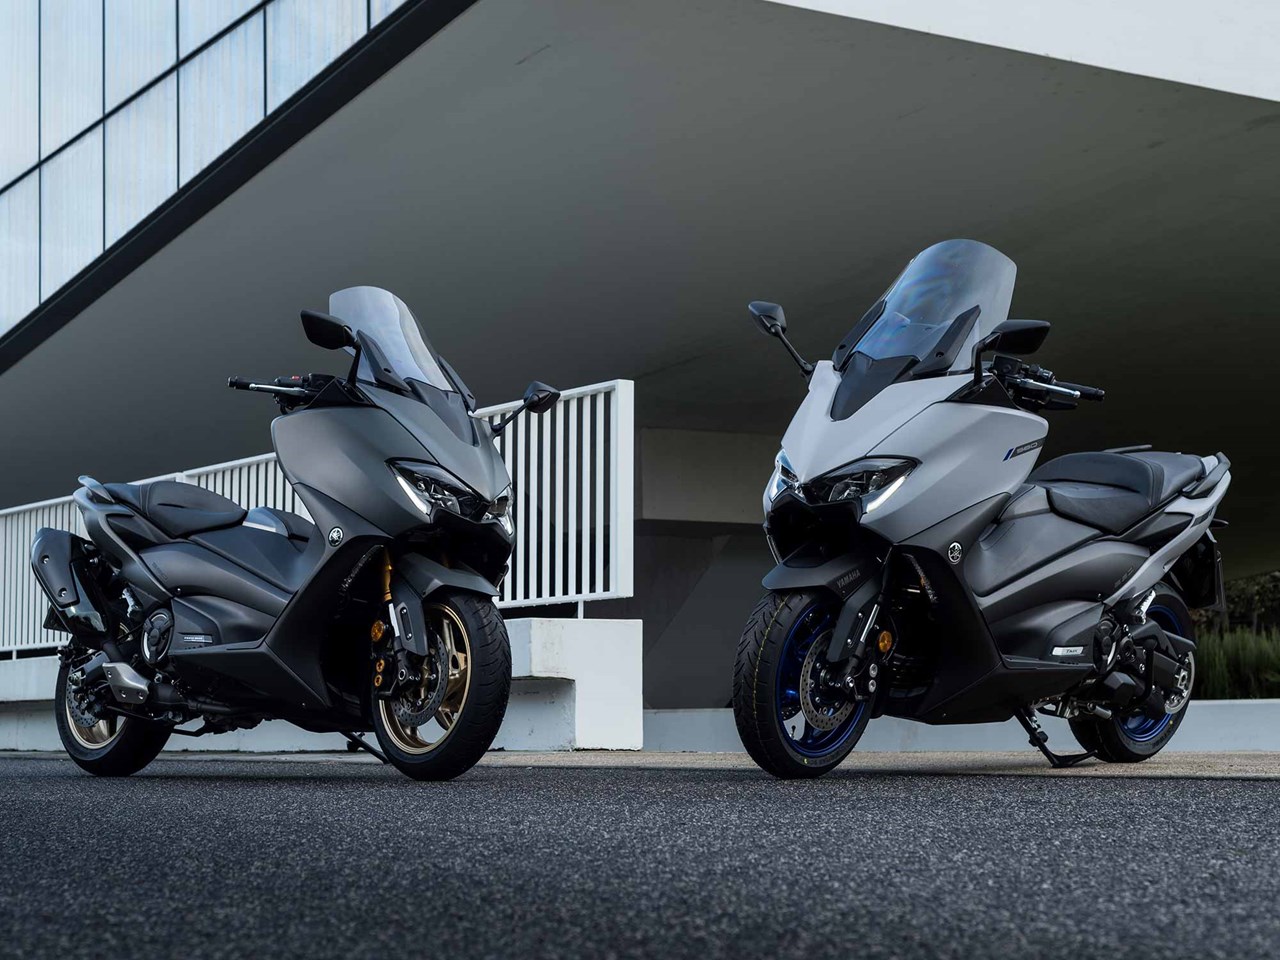 Yamaha TMax 560 scooter revealed, even costlier than a Harley-Davidson Iron  883